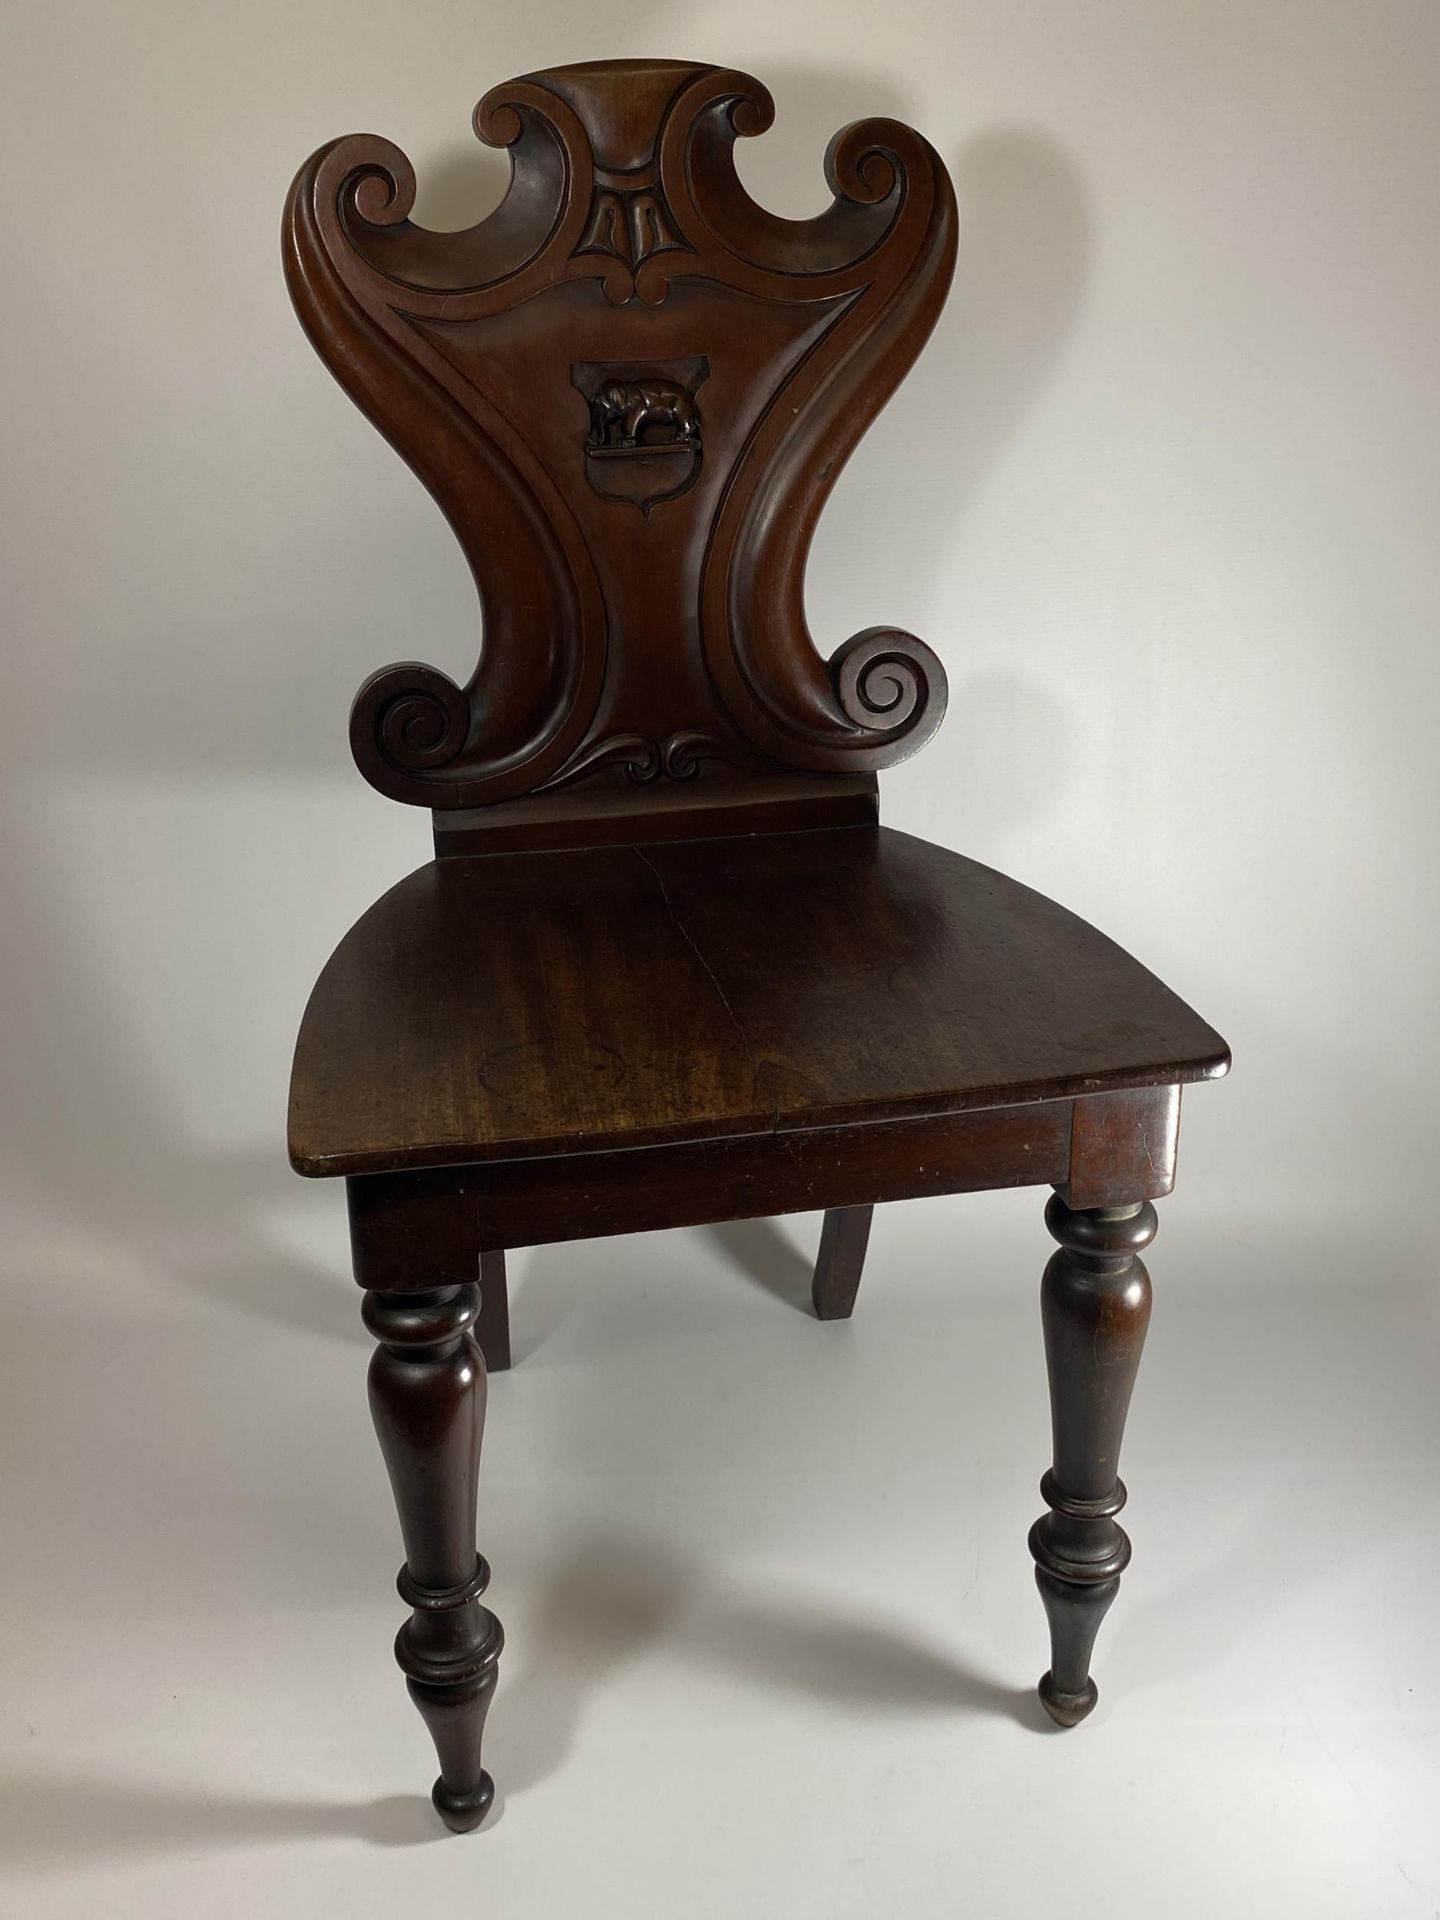 A 19TH CENTURY MAHOGANY CARVED BEDROOM CHAIR WITH ELEPHANT DESIGN BACK